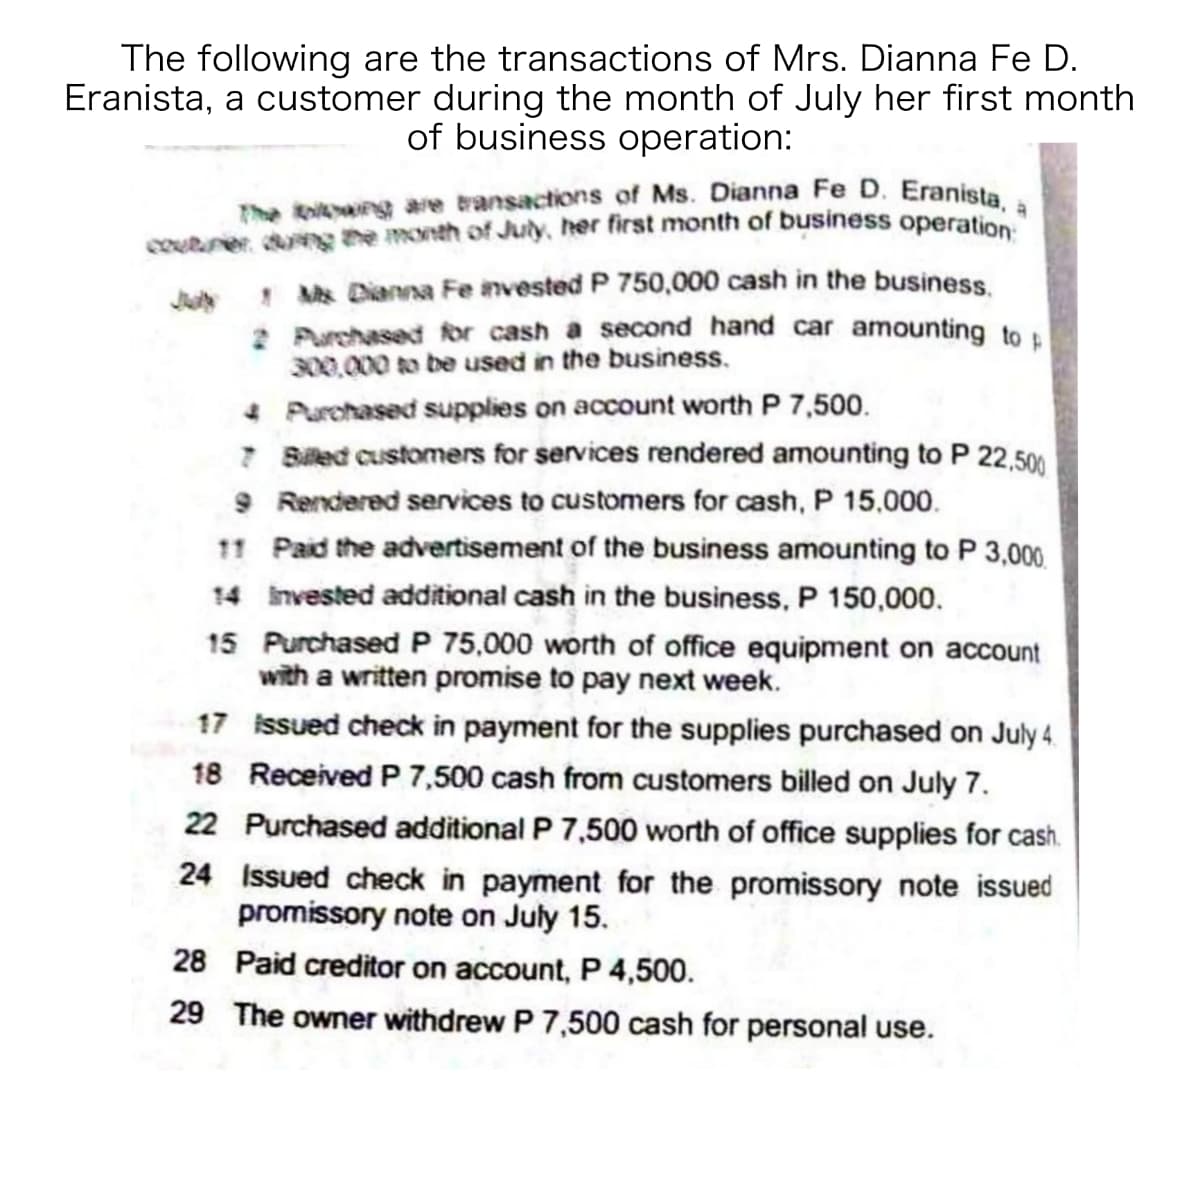 The koi g are transactions of Ms. Dianna Fe D. Eranista, a
The following are the transactions of Mrs. Dianna Fe D.
Eranista, a customer during the month of July her first month
of business operation:
courner dng the month of July, her first month of business operatio
! Ms Dianna Fe invested P 750,000 cash in the business
2 Purchased for cash a second hand car amounting to
00,000 to be used in the business.
4 Purchased supplies on account worth P 7,500.
7 Biled customers for services rendered amounting to P 22,500
9 Rendered services to customers for cash, P 15,000.
11 Paid the advertisement of the business amounting to P 3,000.
14 invested additional cash in the business, P 150,000.
15 Purchased P 75,000 worth of office equipment on account
with a written promise to pay next week.
17 issued check in payment for the supplies purchased on July 4.
18 Received P 7,500 cash from customers billed on July 7.
22 Purchased additional P 7,500 worth of office supplies for cash.
24 Issued check in payment for the promissory note issued
promissory note on July 15.
28 Paid creditor on account, P 4,500.
29 The owner withdrew P 7,500 cash for personal use.
